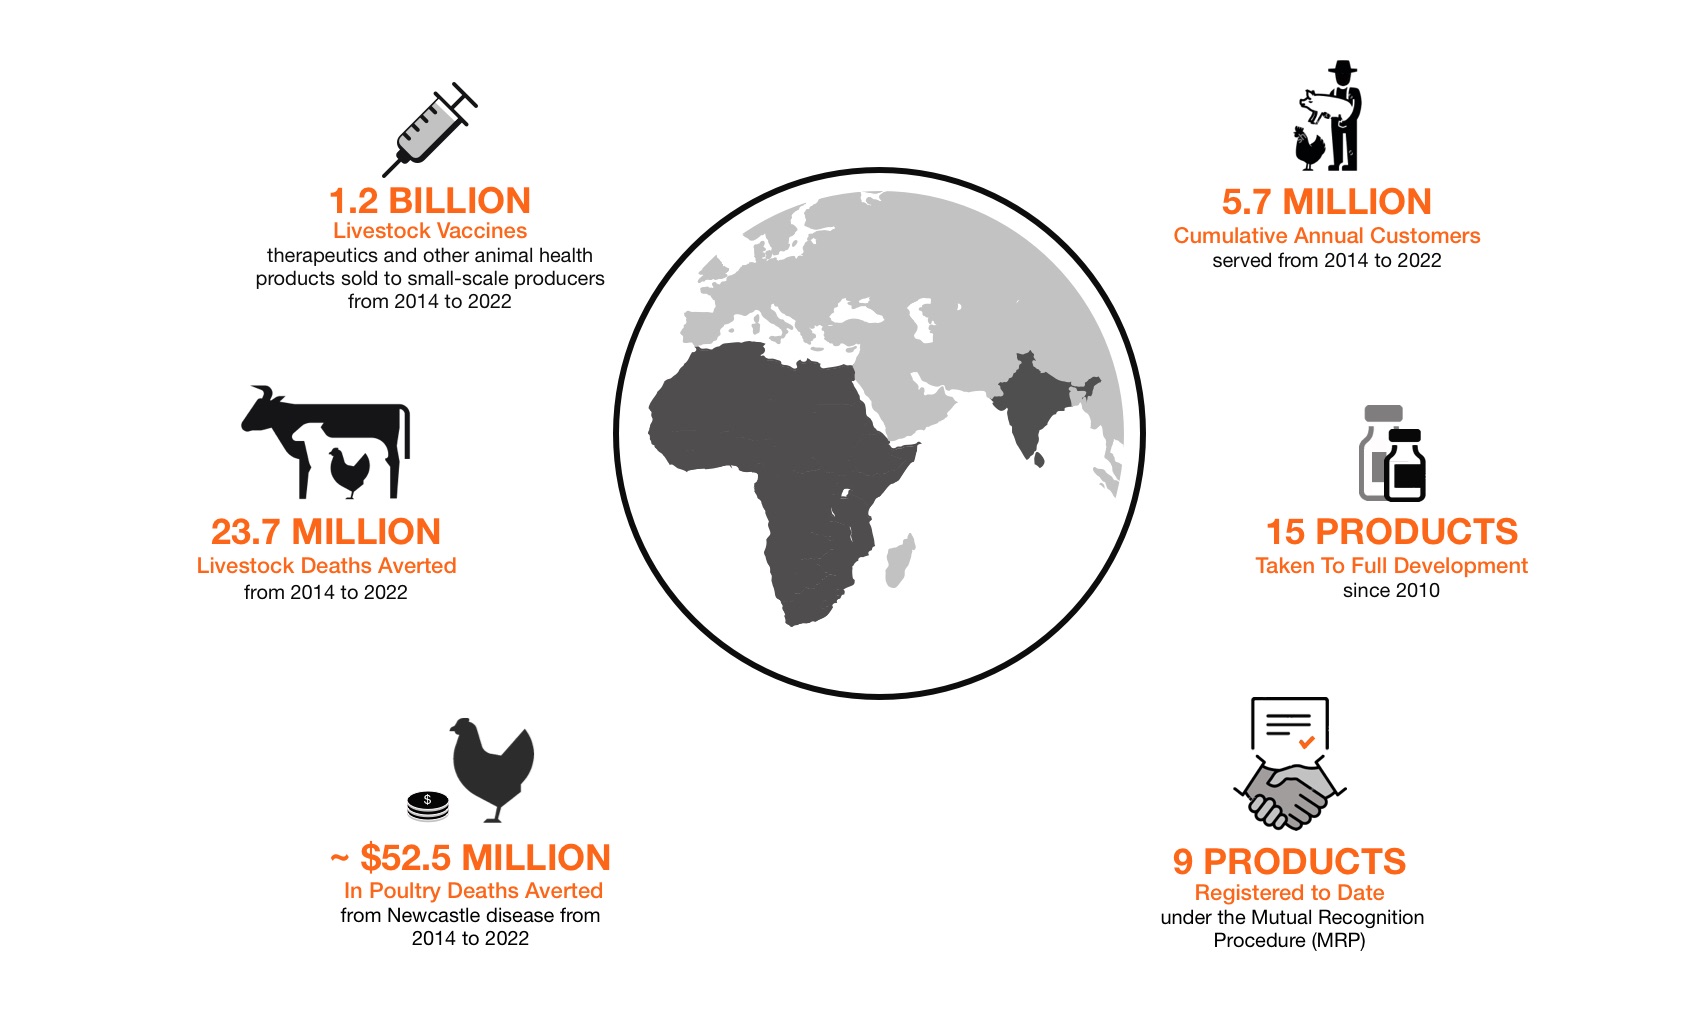 Infographic with GALVmed Achievements. 1.2 billion livestock vaccines, therapeutics and other animal health products sold to small-scale producers from 2014 to 2022. 23.7 million livestock deaths averted from 2014 to 2022. Approximately $52.5 million in poultry deaths averted from Newcastle disease from 2014 to 2022. 5.7 million cumulative annual customers served from 2014 to 2022. 13 products taken to full development from 2010, of which 8 have been commercialized. 9 products registered to date under the Mutual Recognition Procedure.